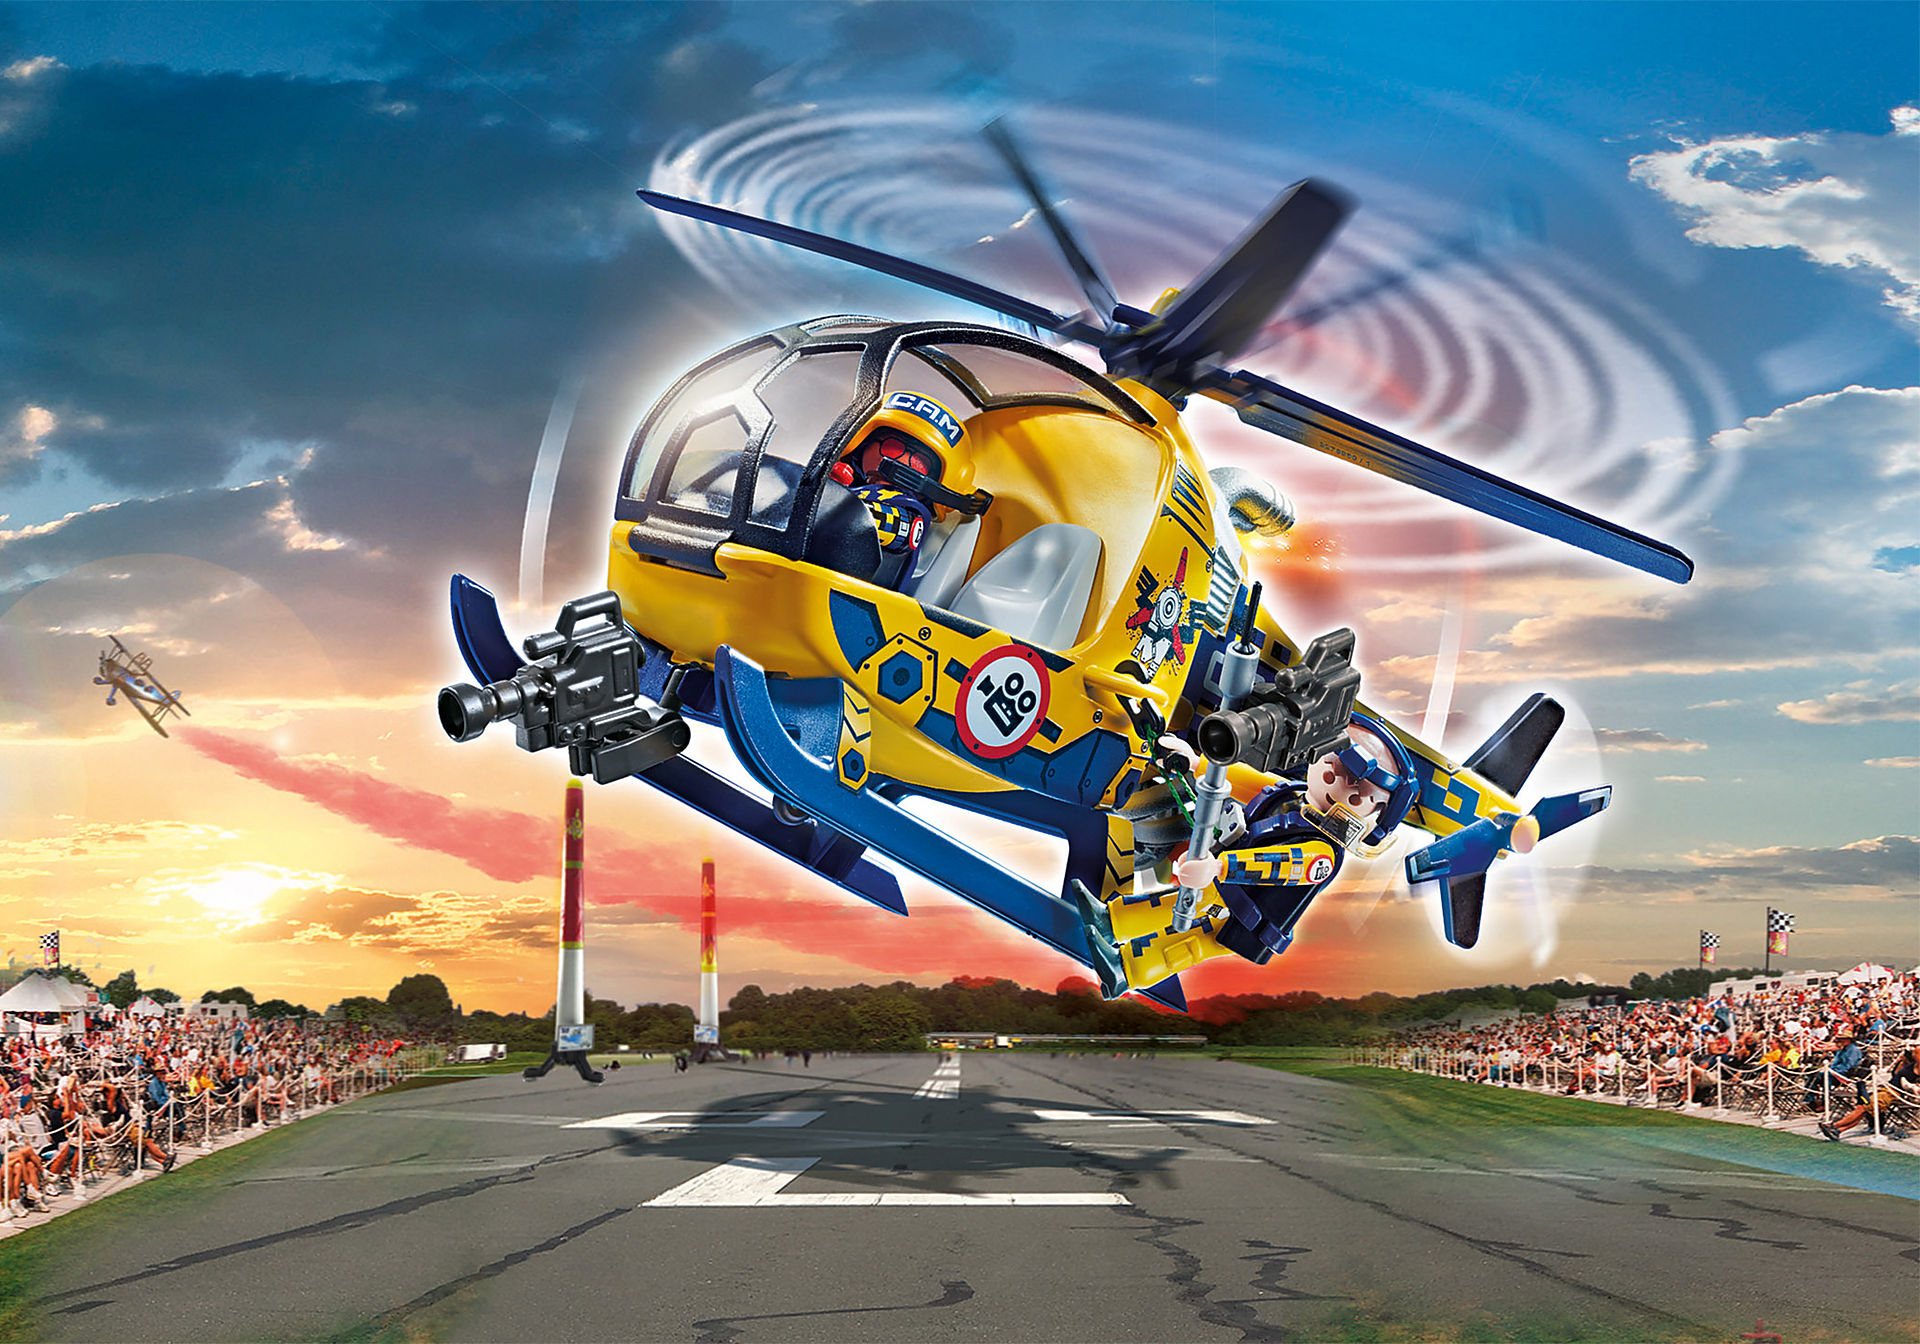 70833 Air Stunt Show Helicopter with Film Crew zoom image1